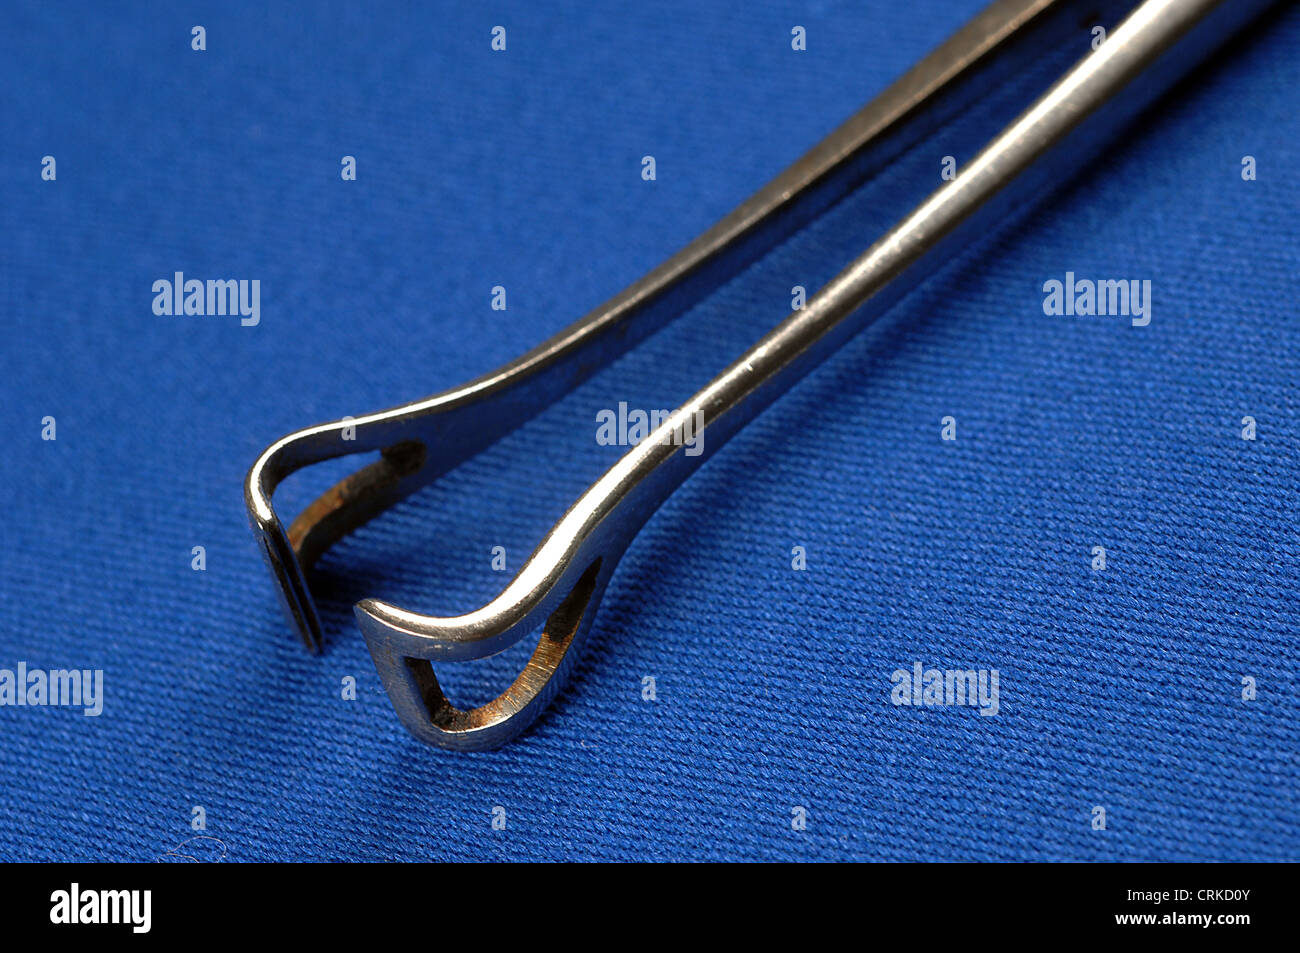 medical clamp Stock Photo